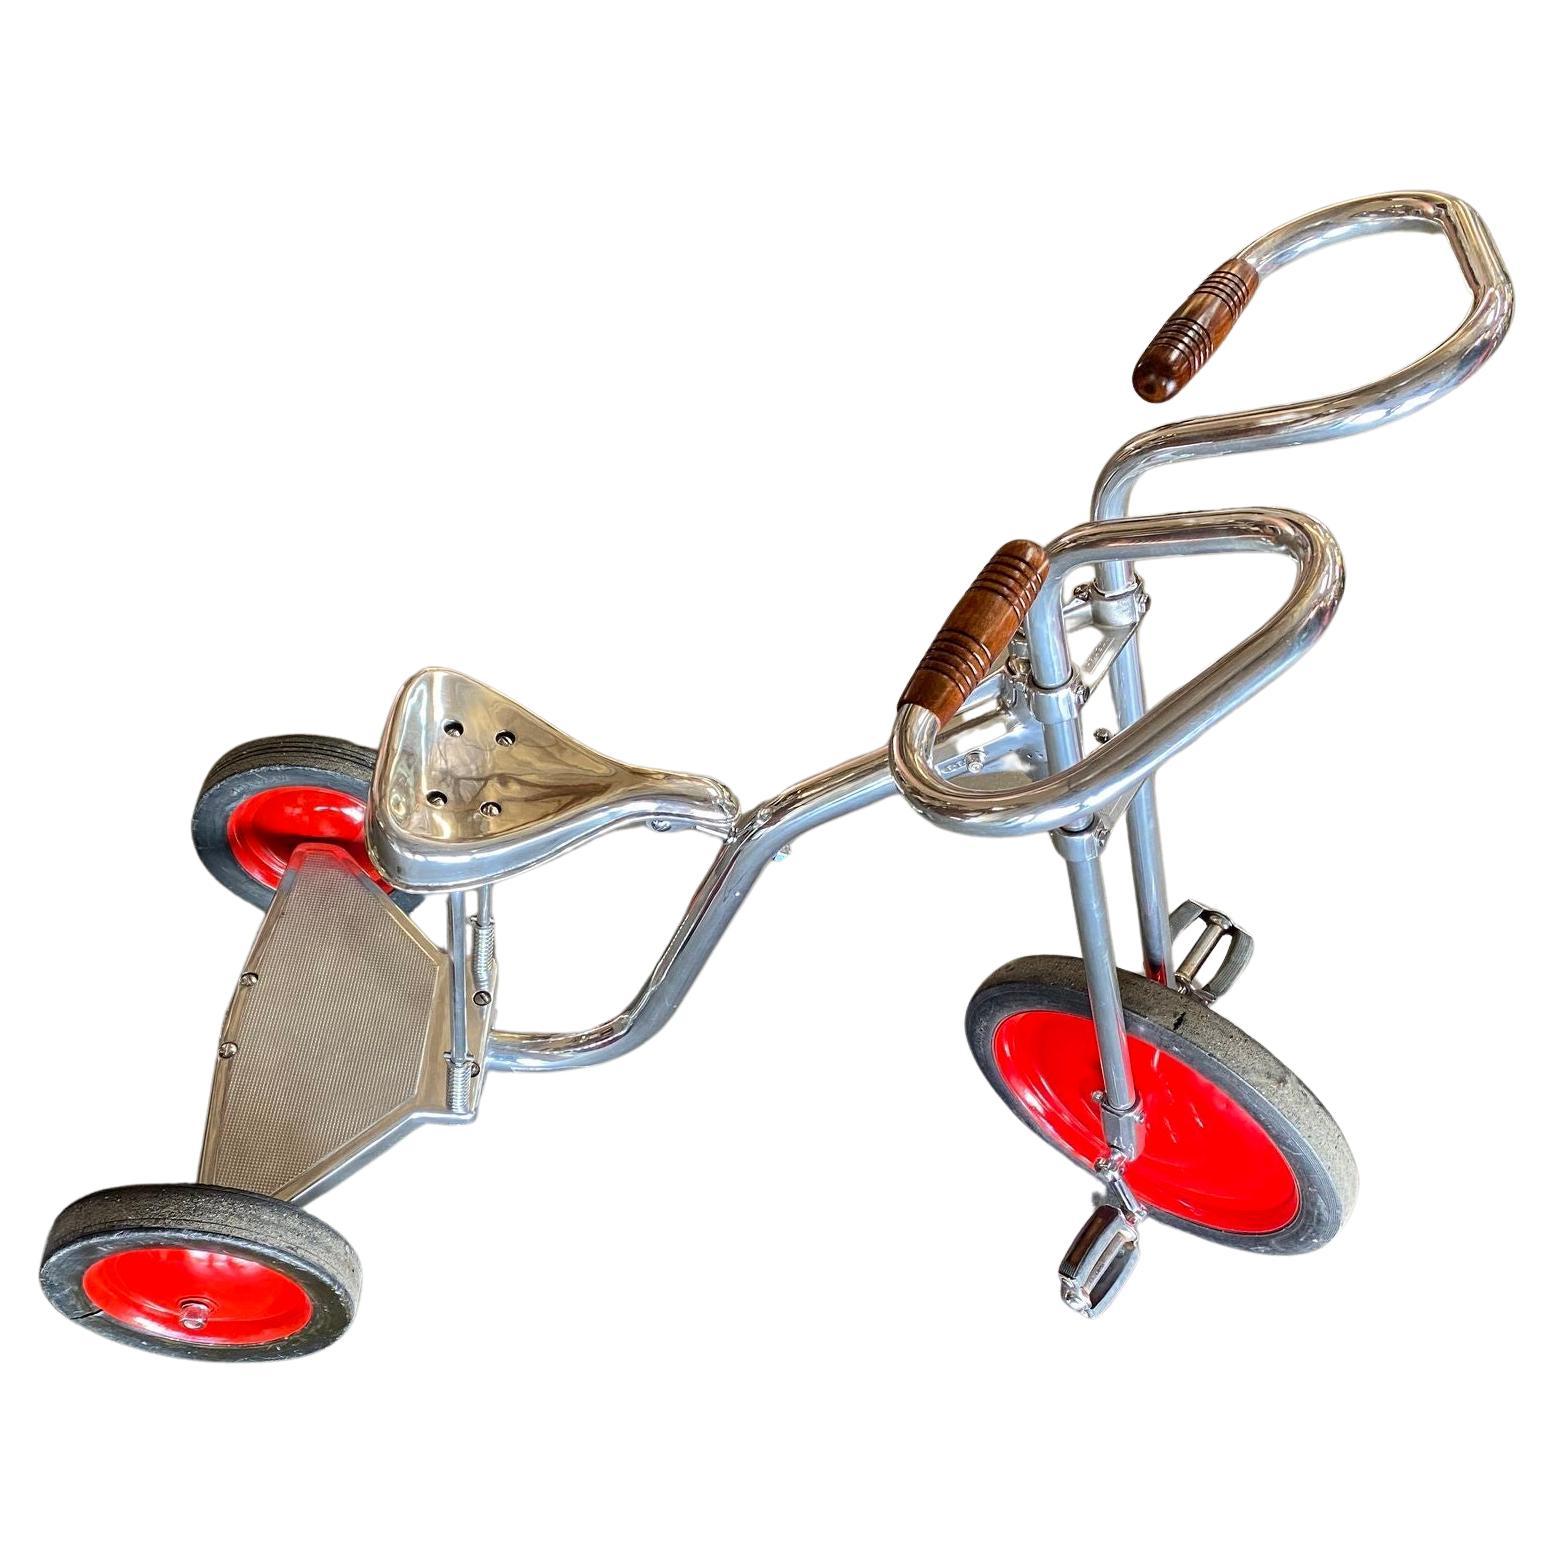 Art Deco Polished Chrome Adult Size Tricycle Trike style of Bowden, 1940 For Sale